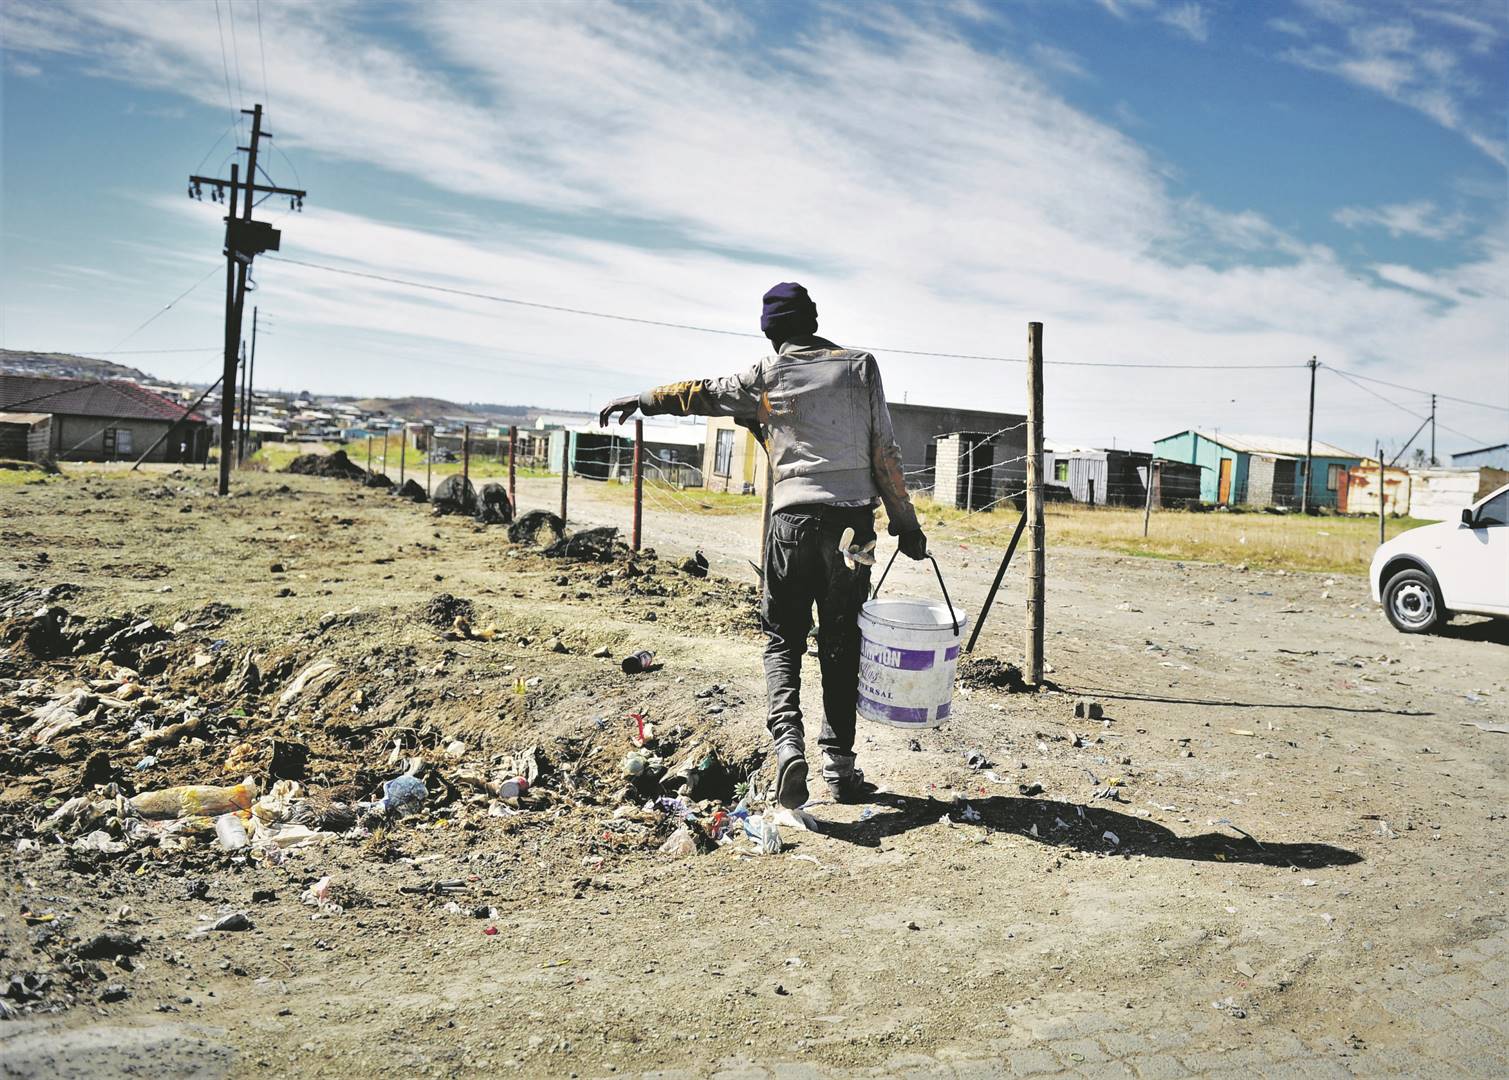 Lekwa Municipality has become the poster child for South Africa's municipal failures. 